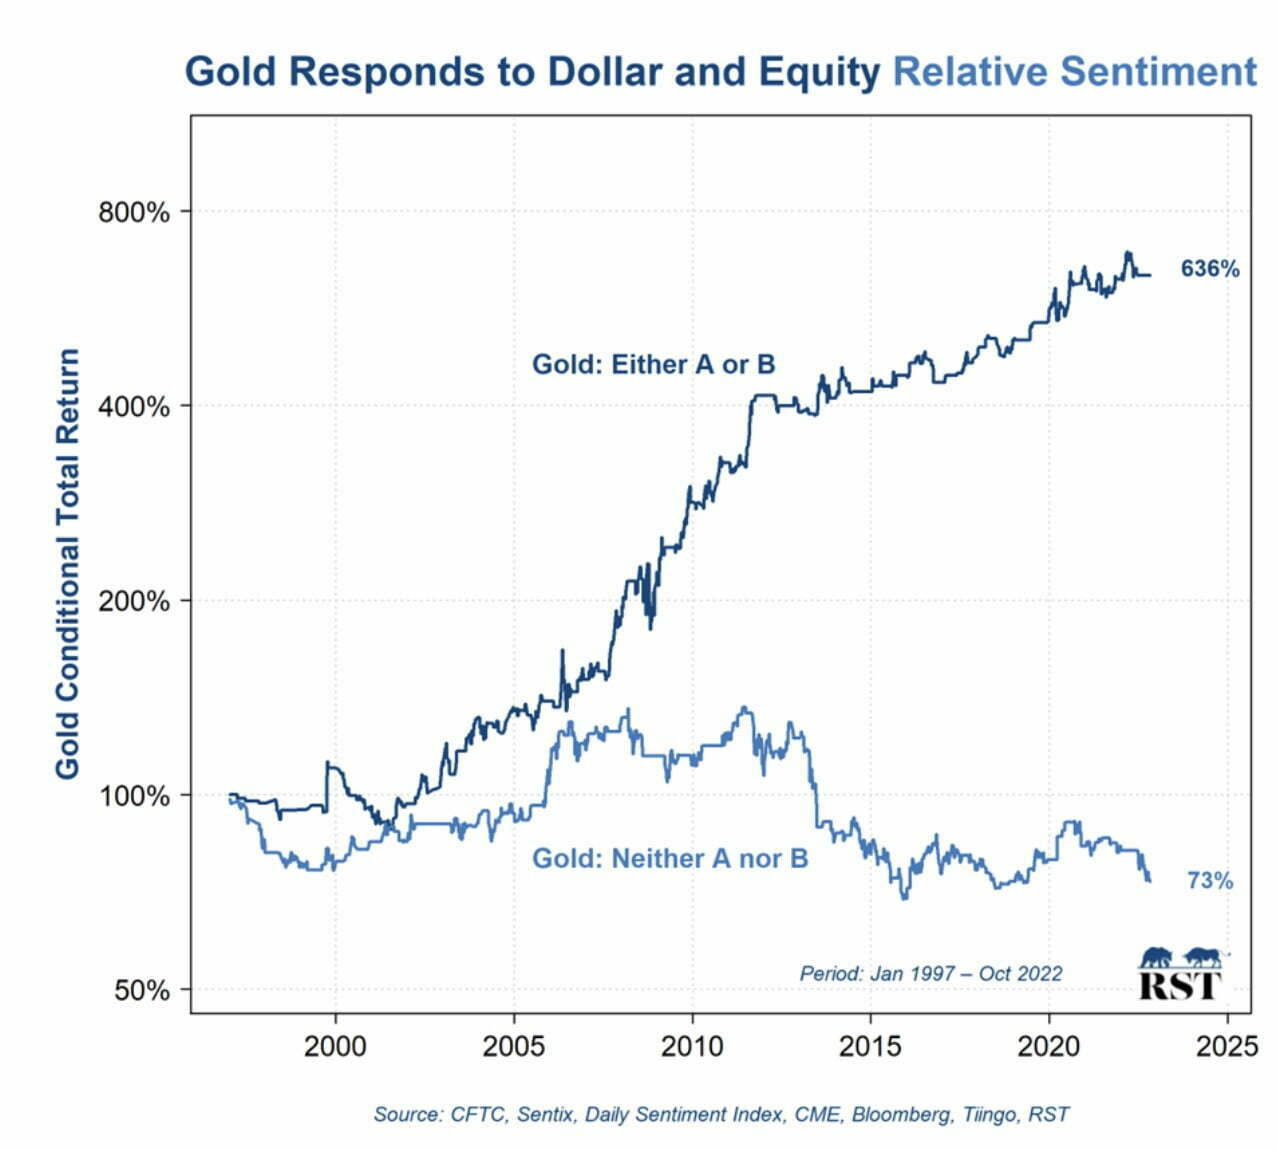 Gold Responds To Dollar and Equity Relative Sentiment 